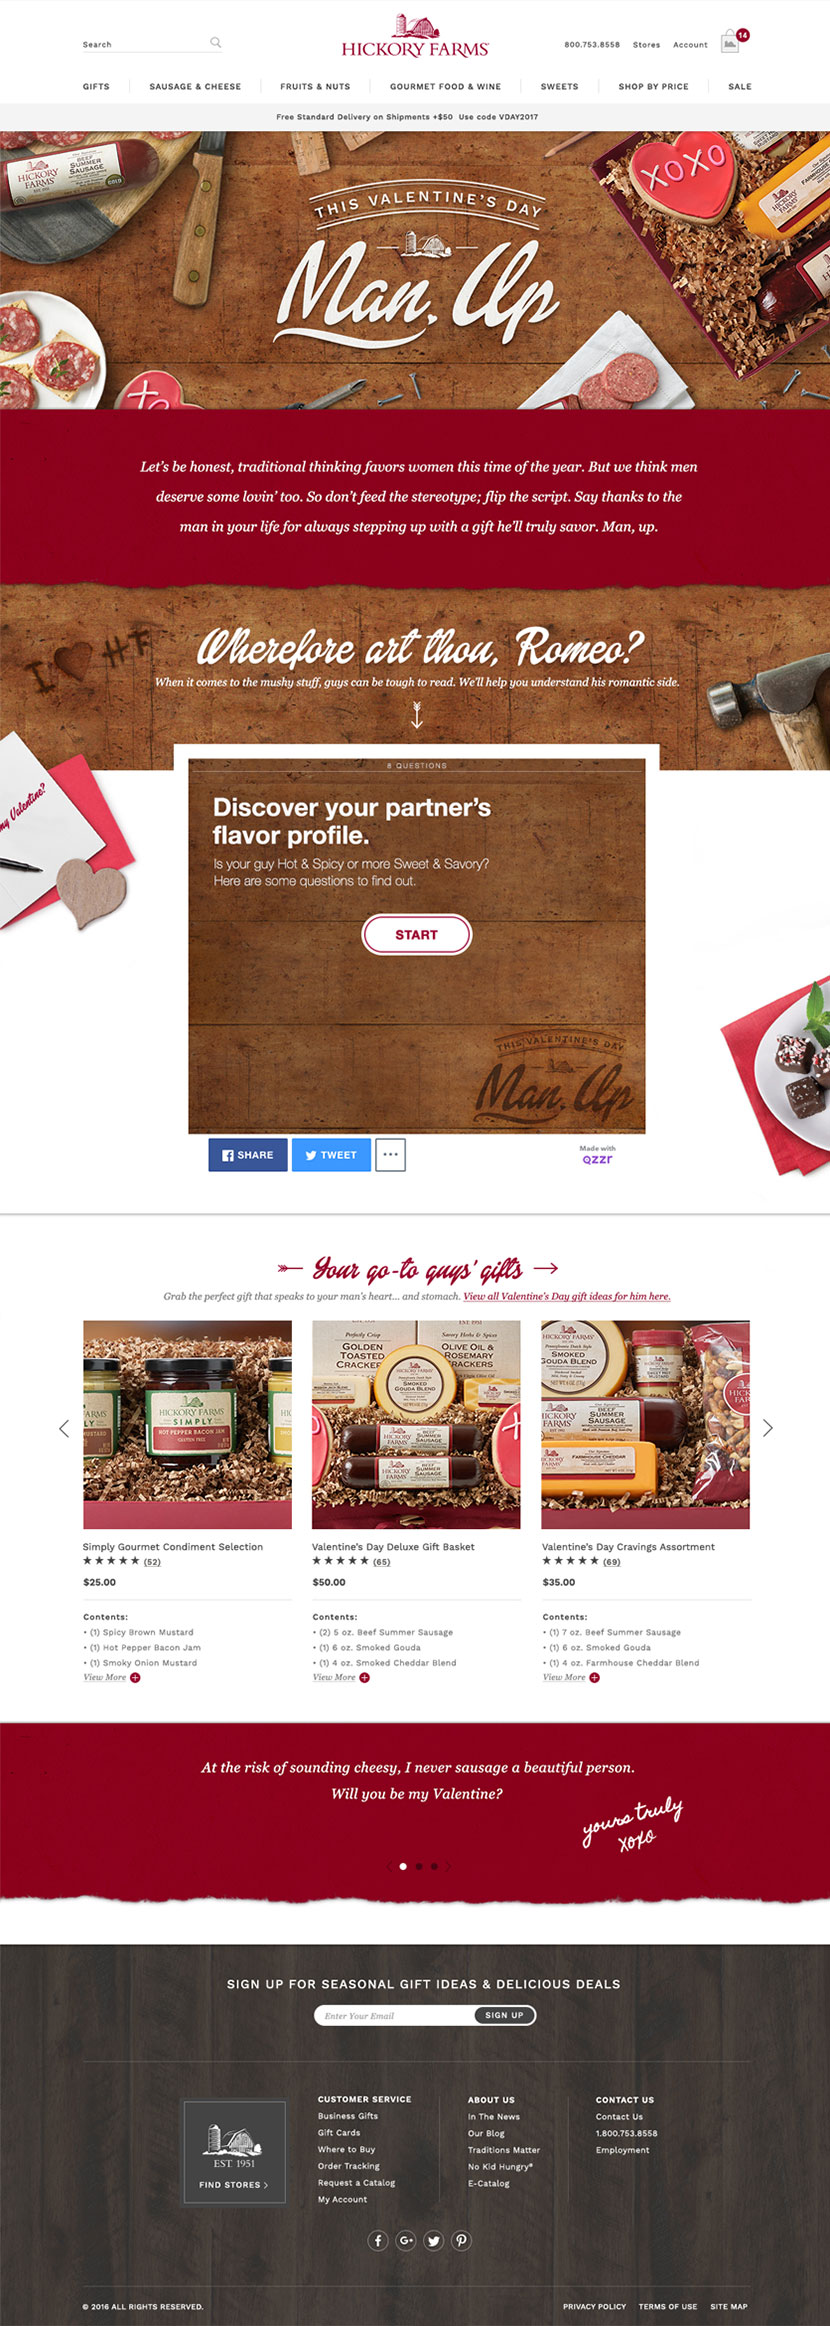 Hickory Farms Valentine's Day campaign landing page